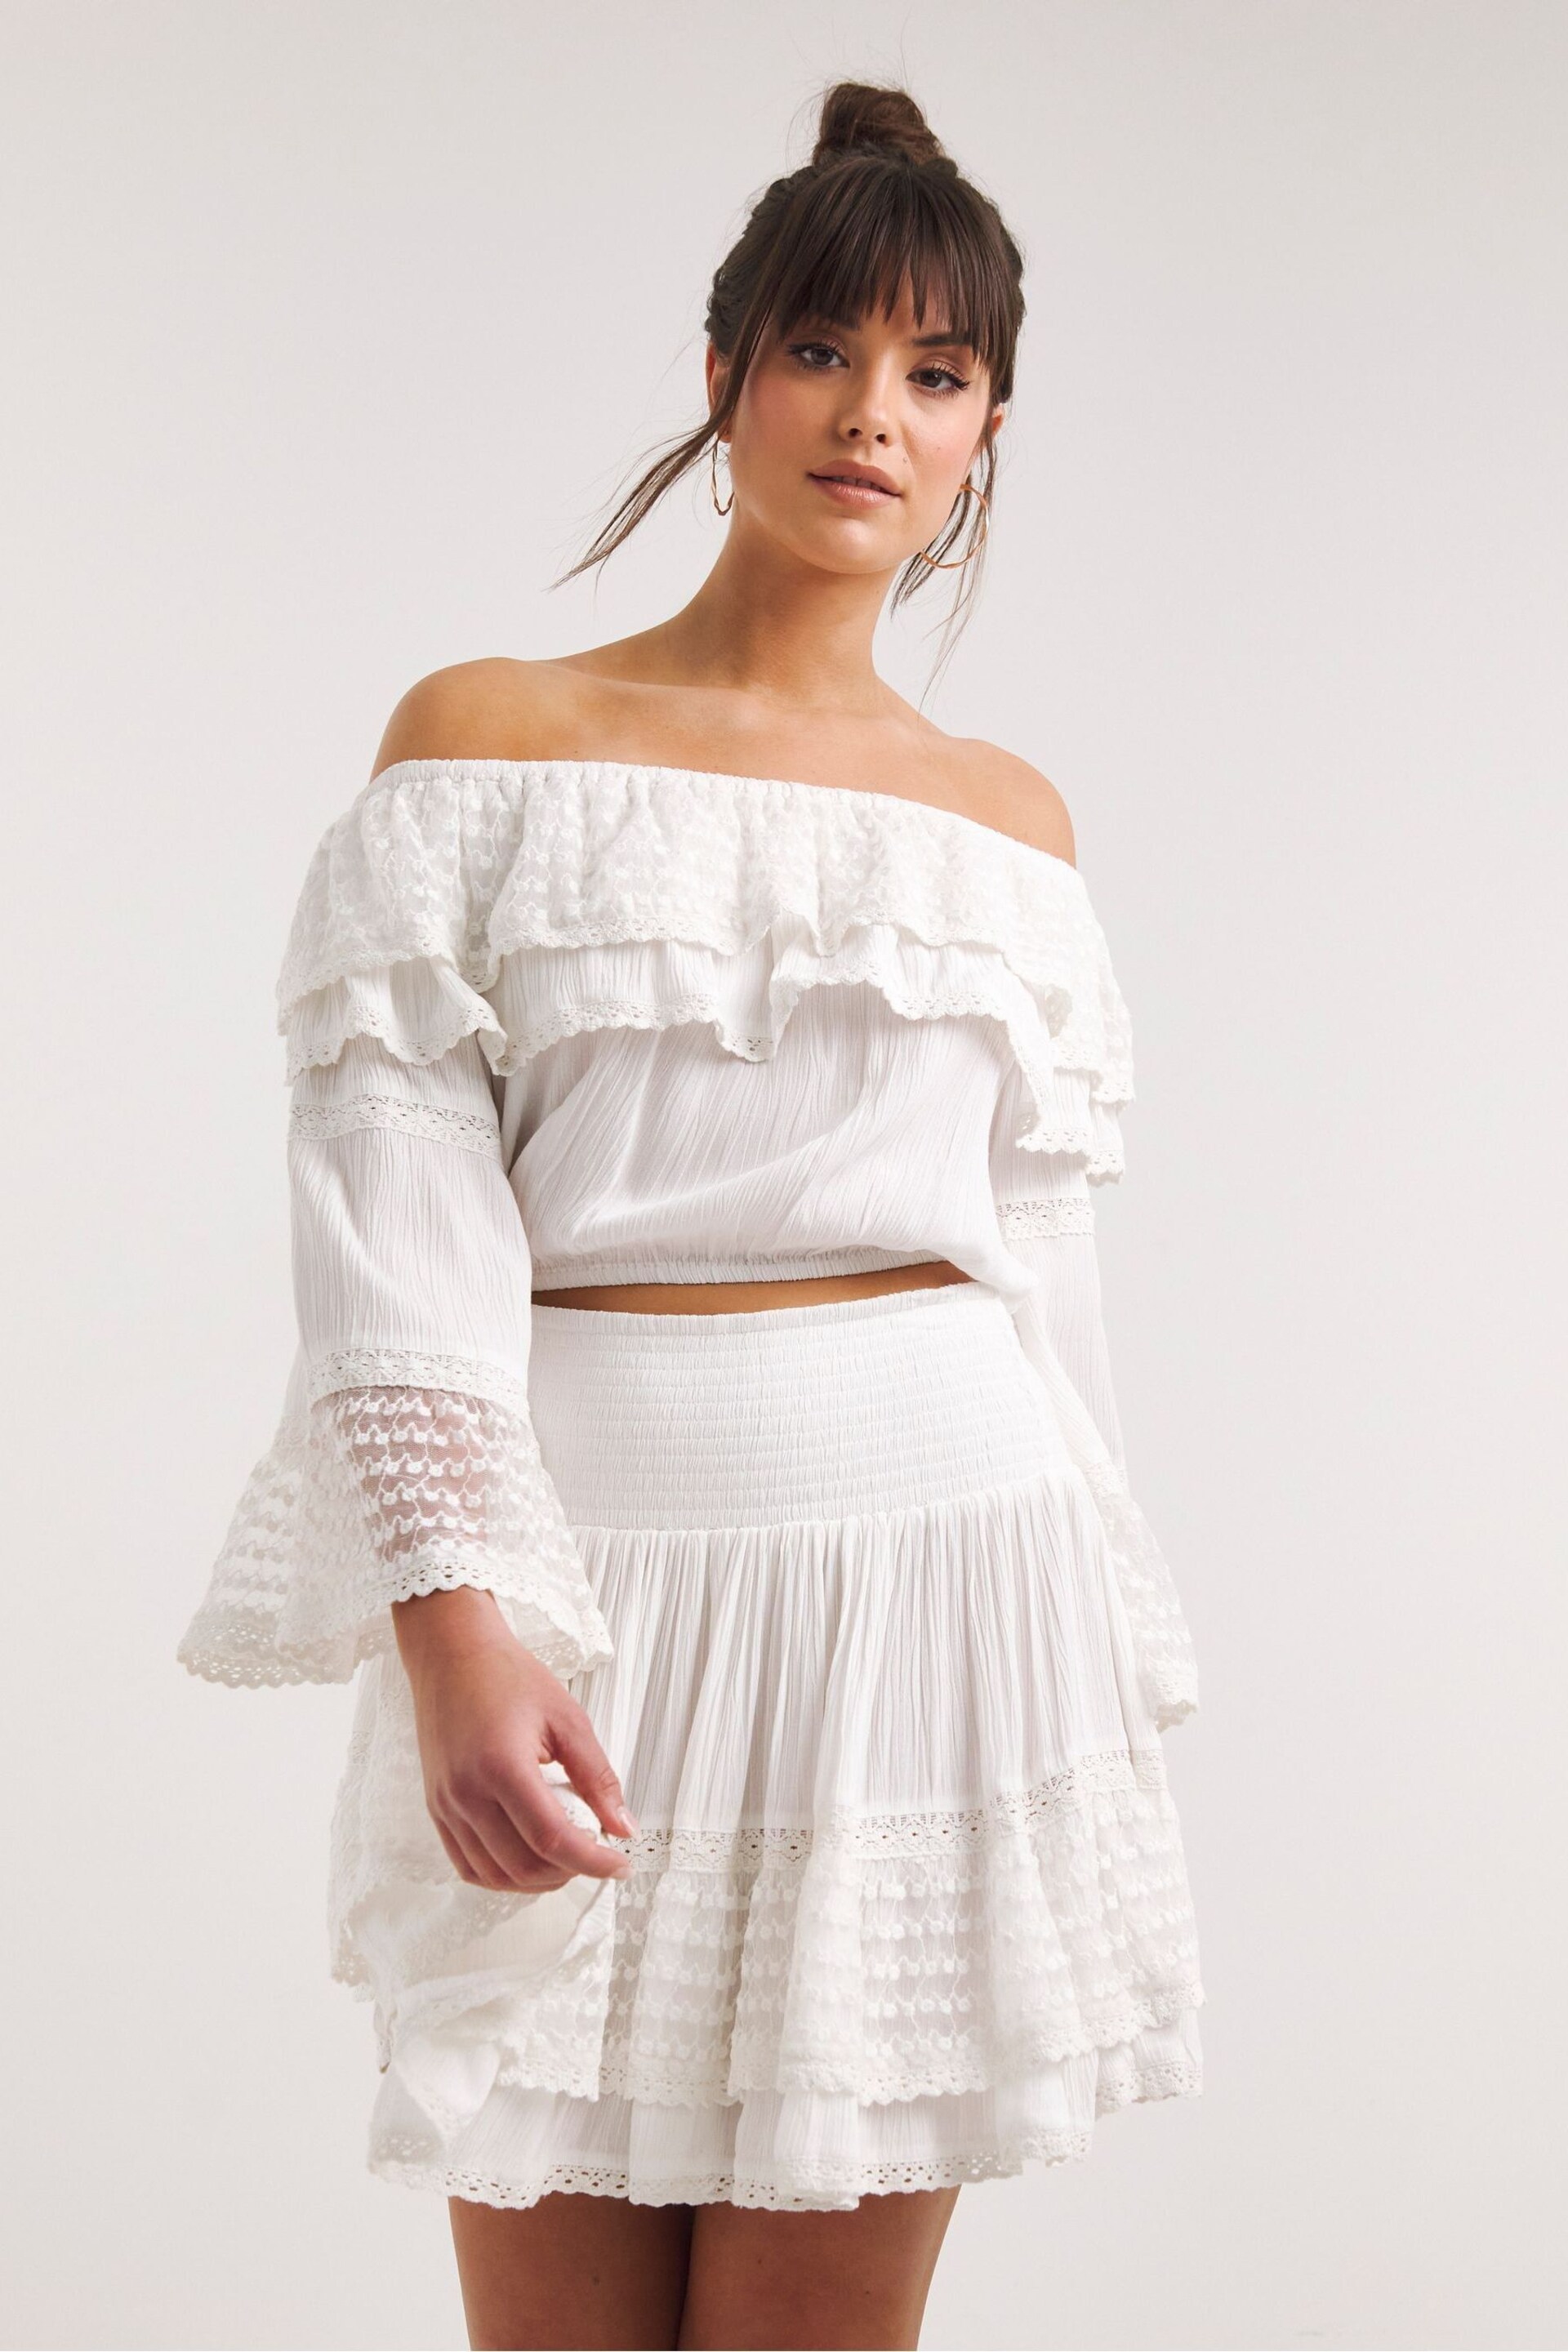 Figleaves Frida Beach Co-Ord White Cover-Up - Image 1 of 4